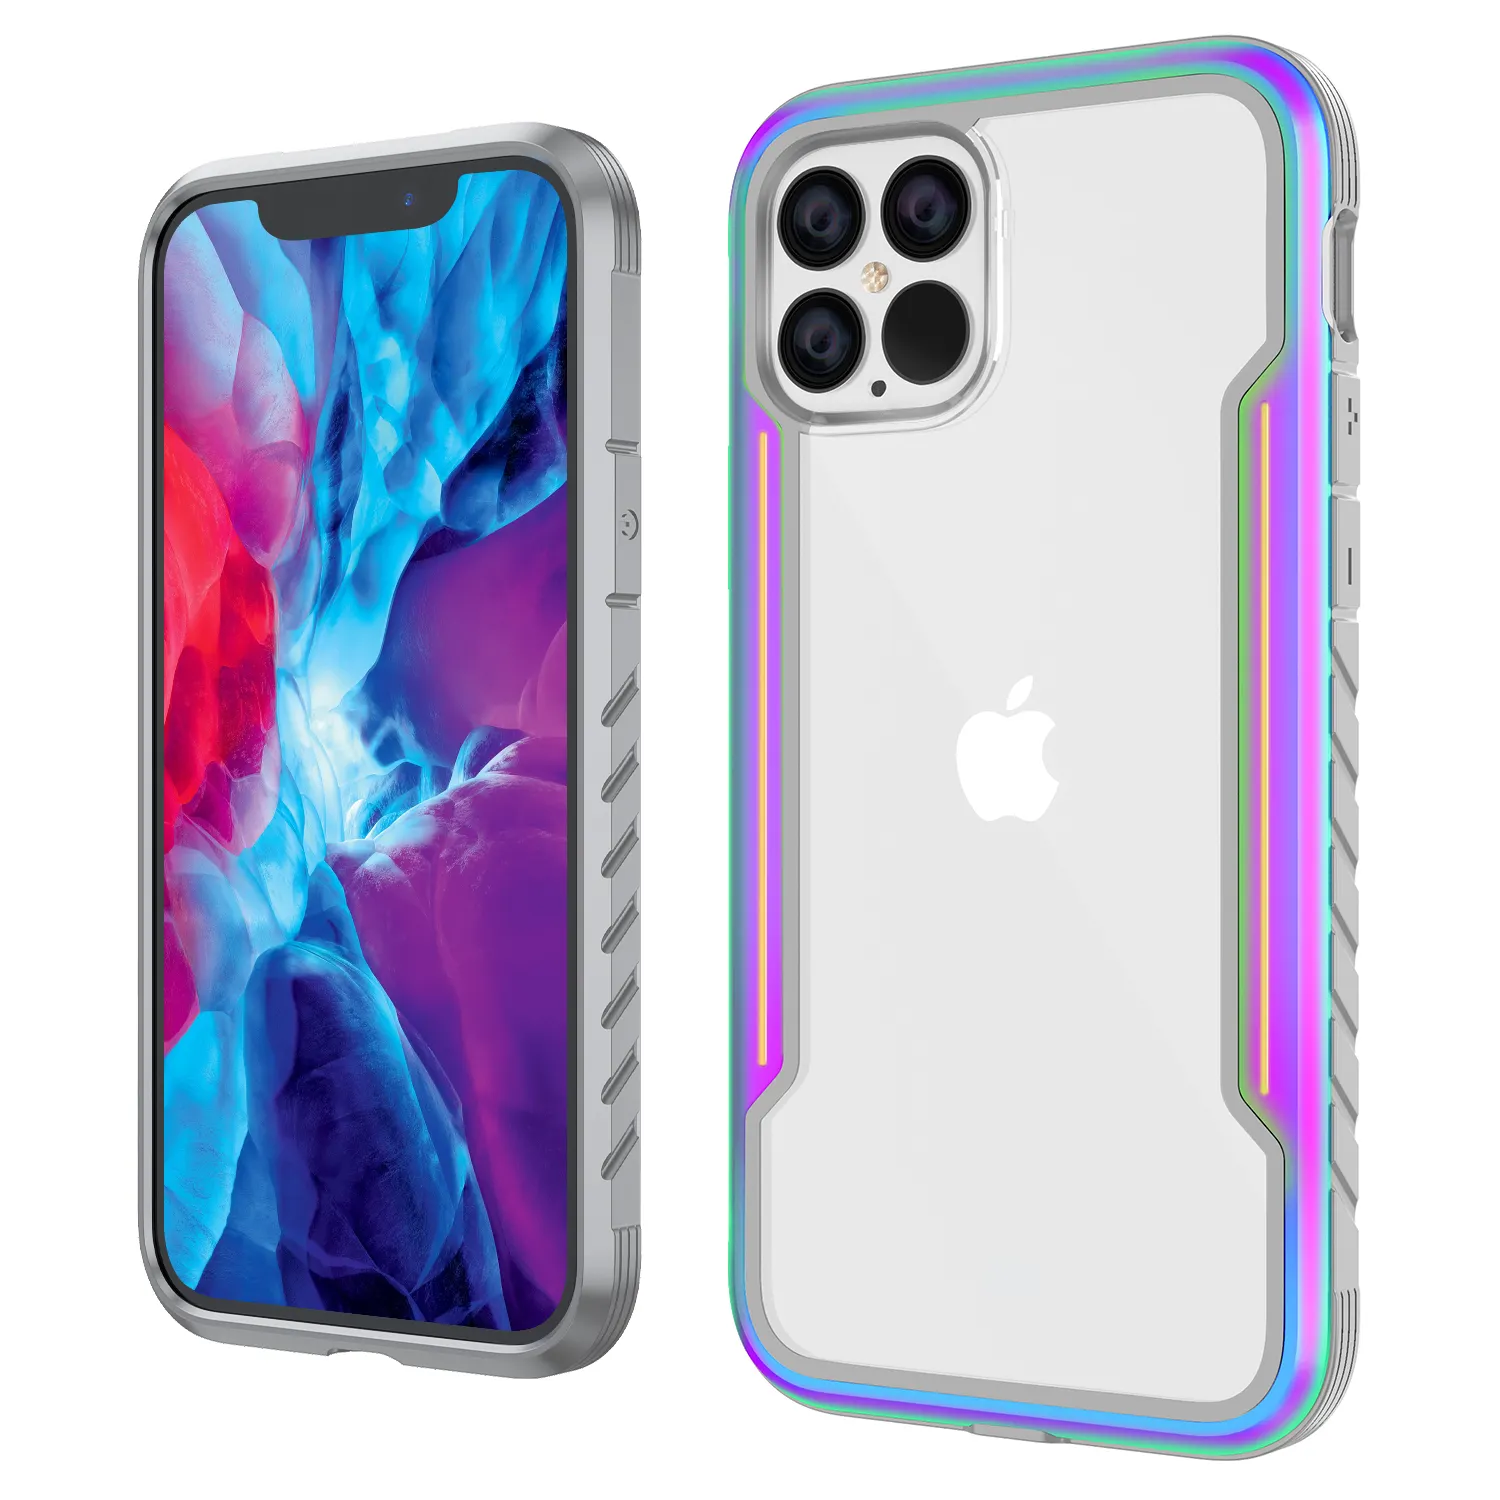 Iridescent Defense Shield Shockproof Grade Protective Metal Phone Case For iPhone 12 12 Pro 6.1inch